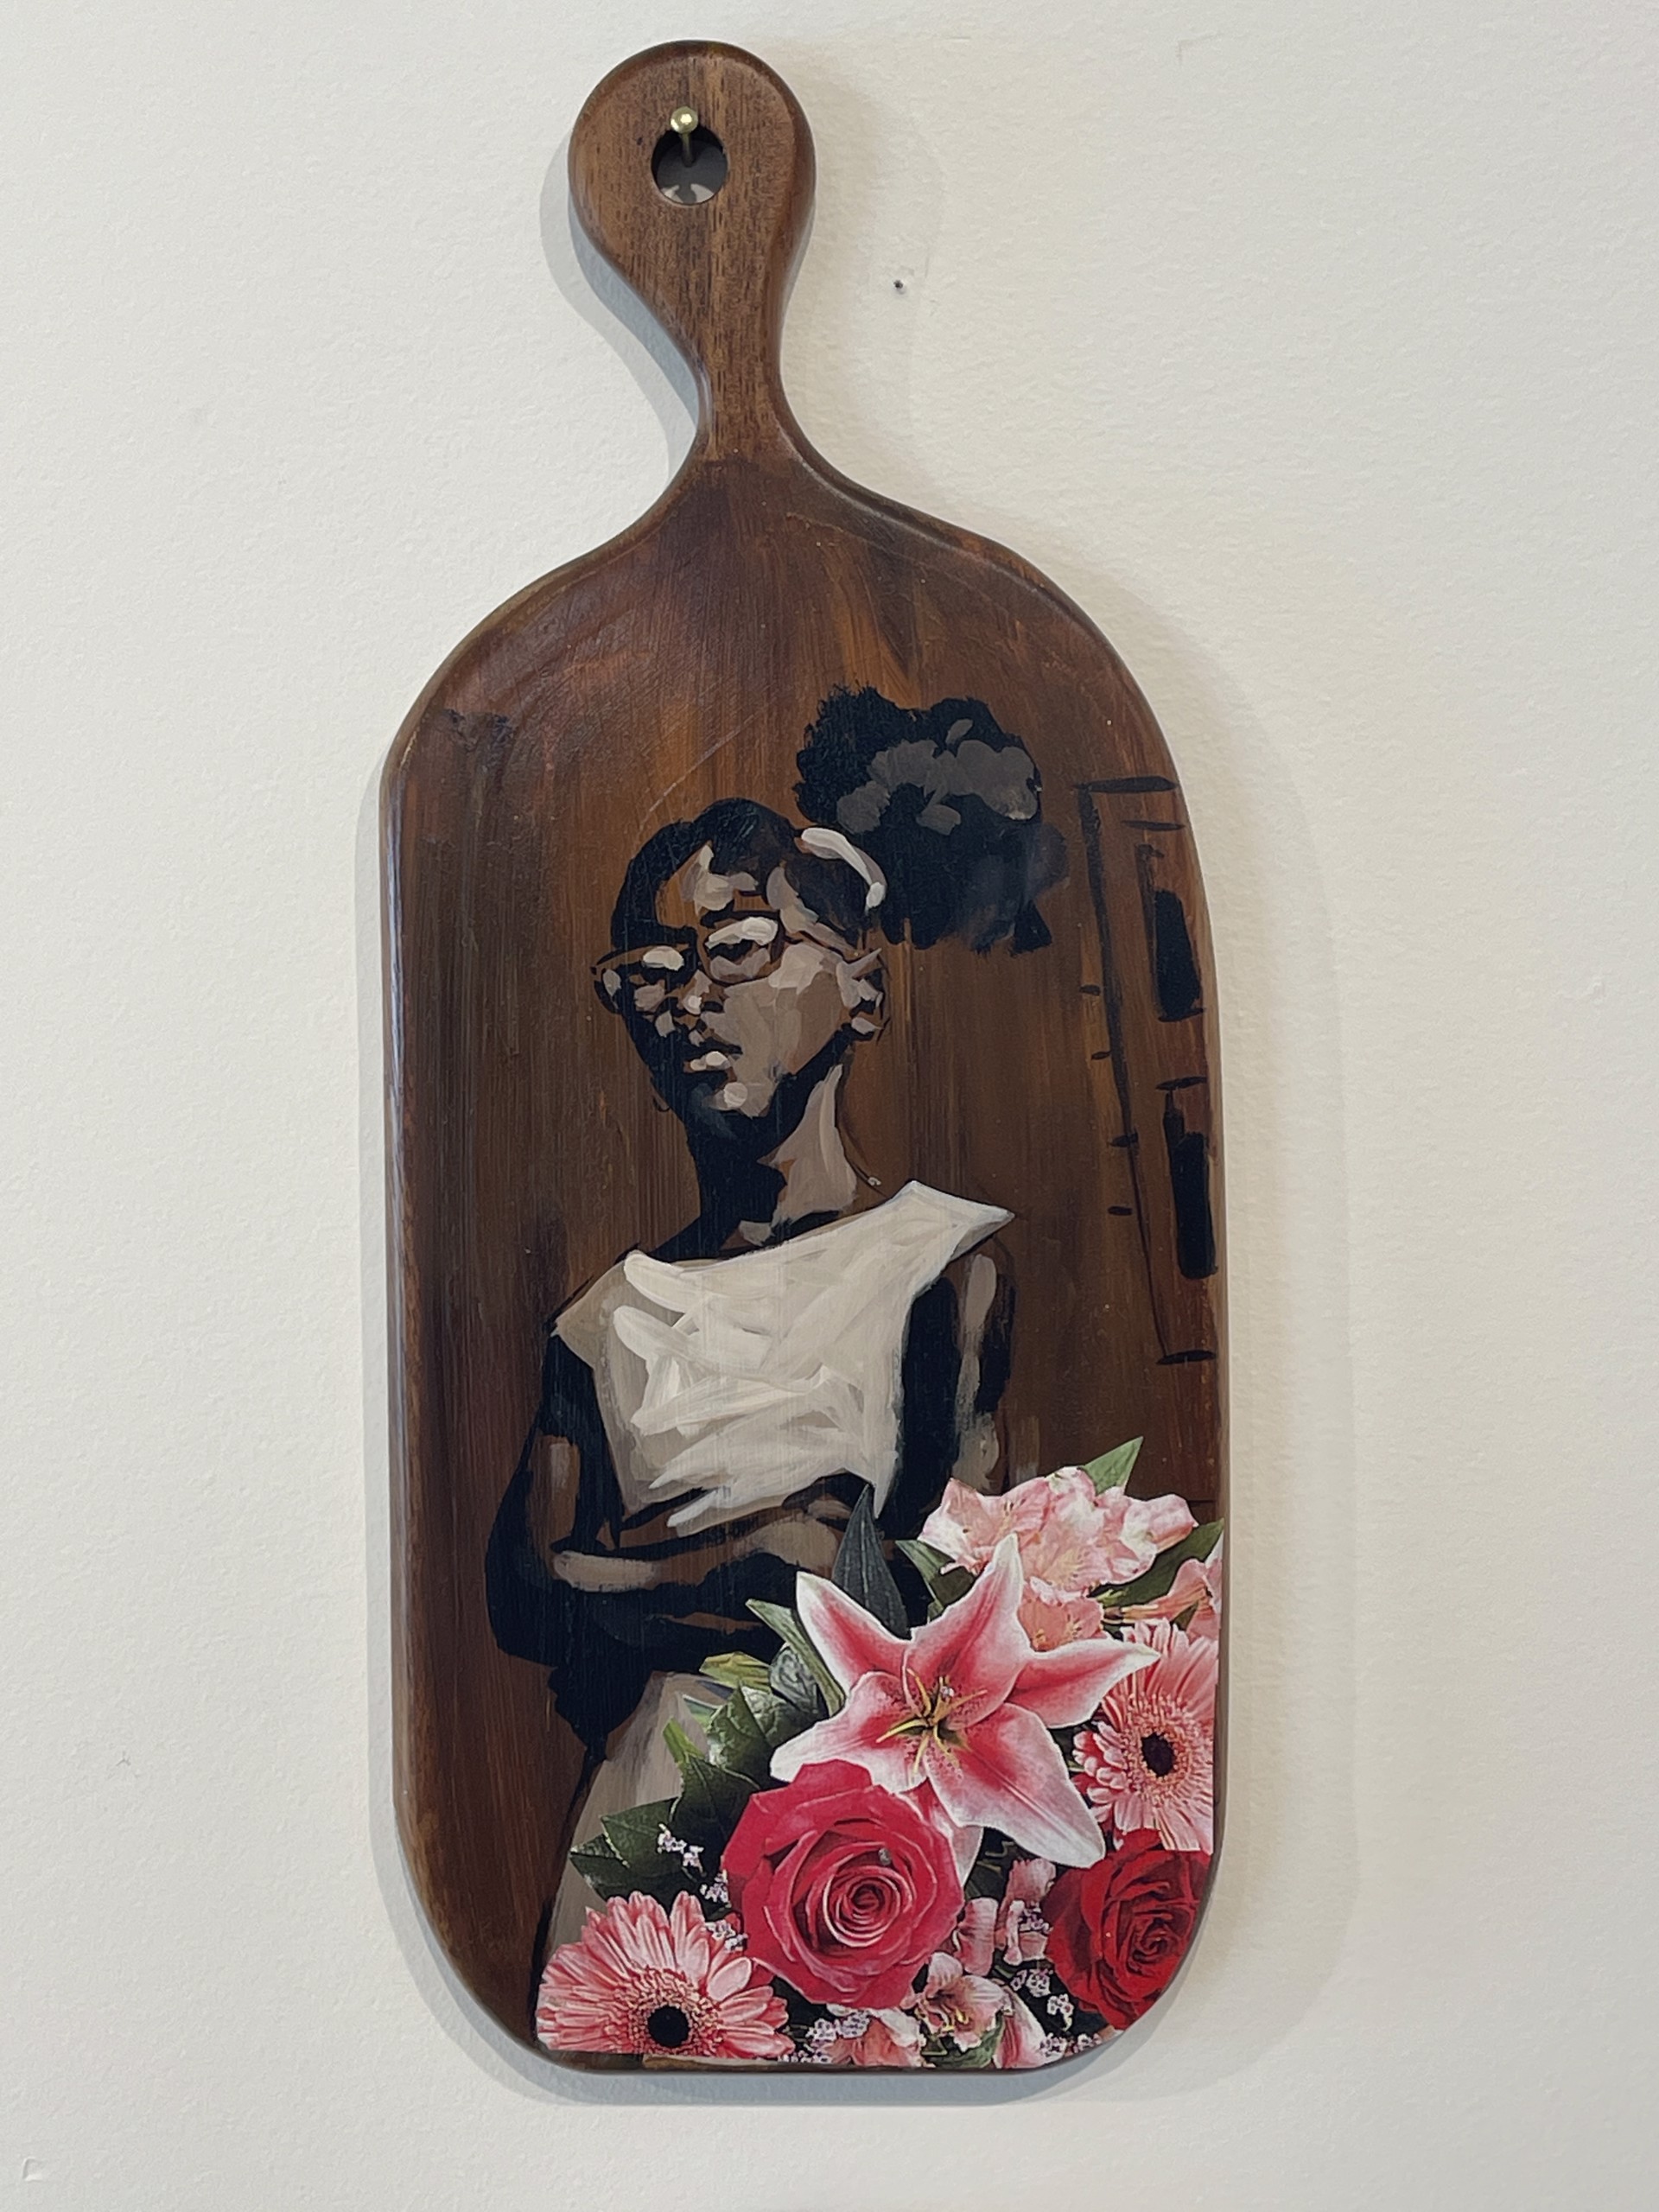 She's My Heart Vintage Paddle by Charly Palmer